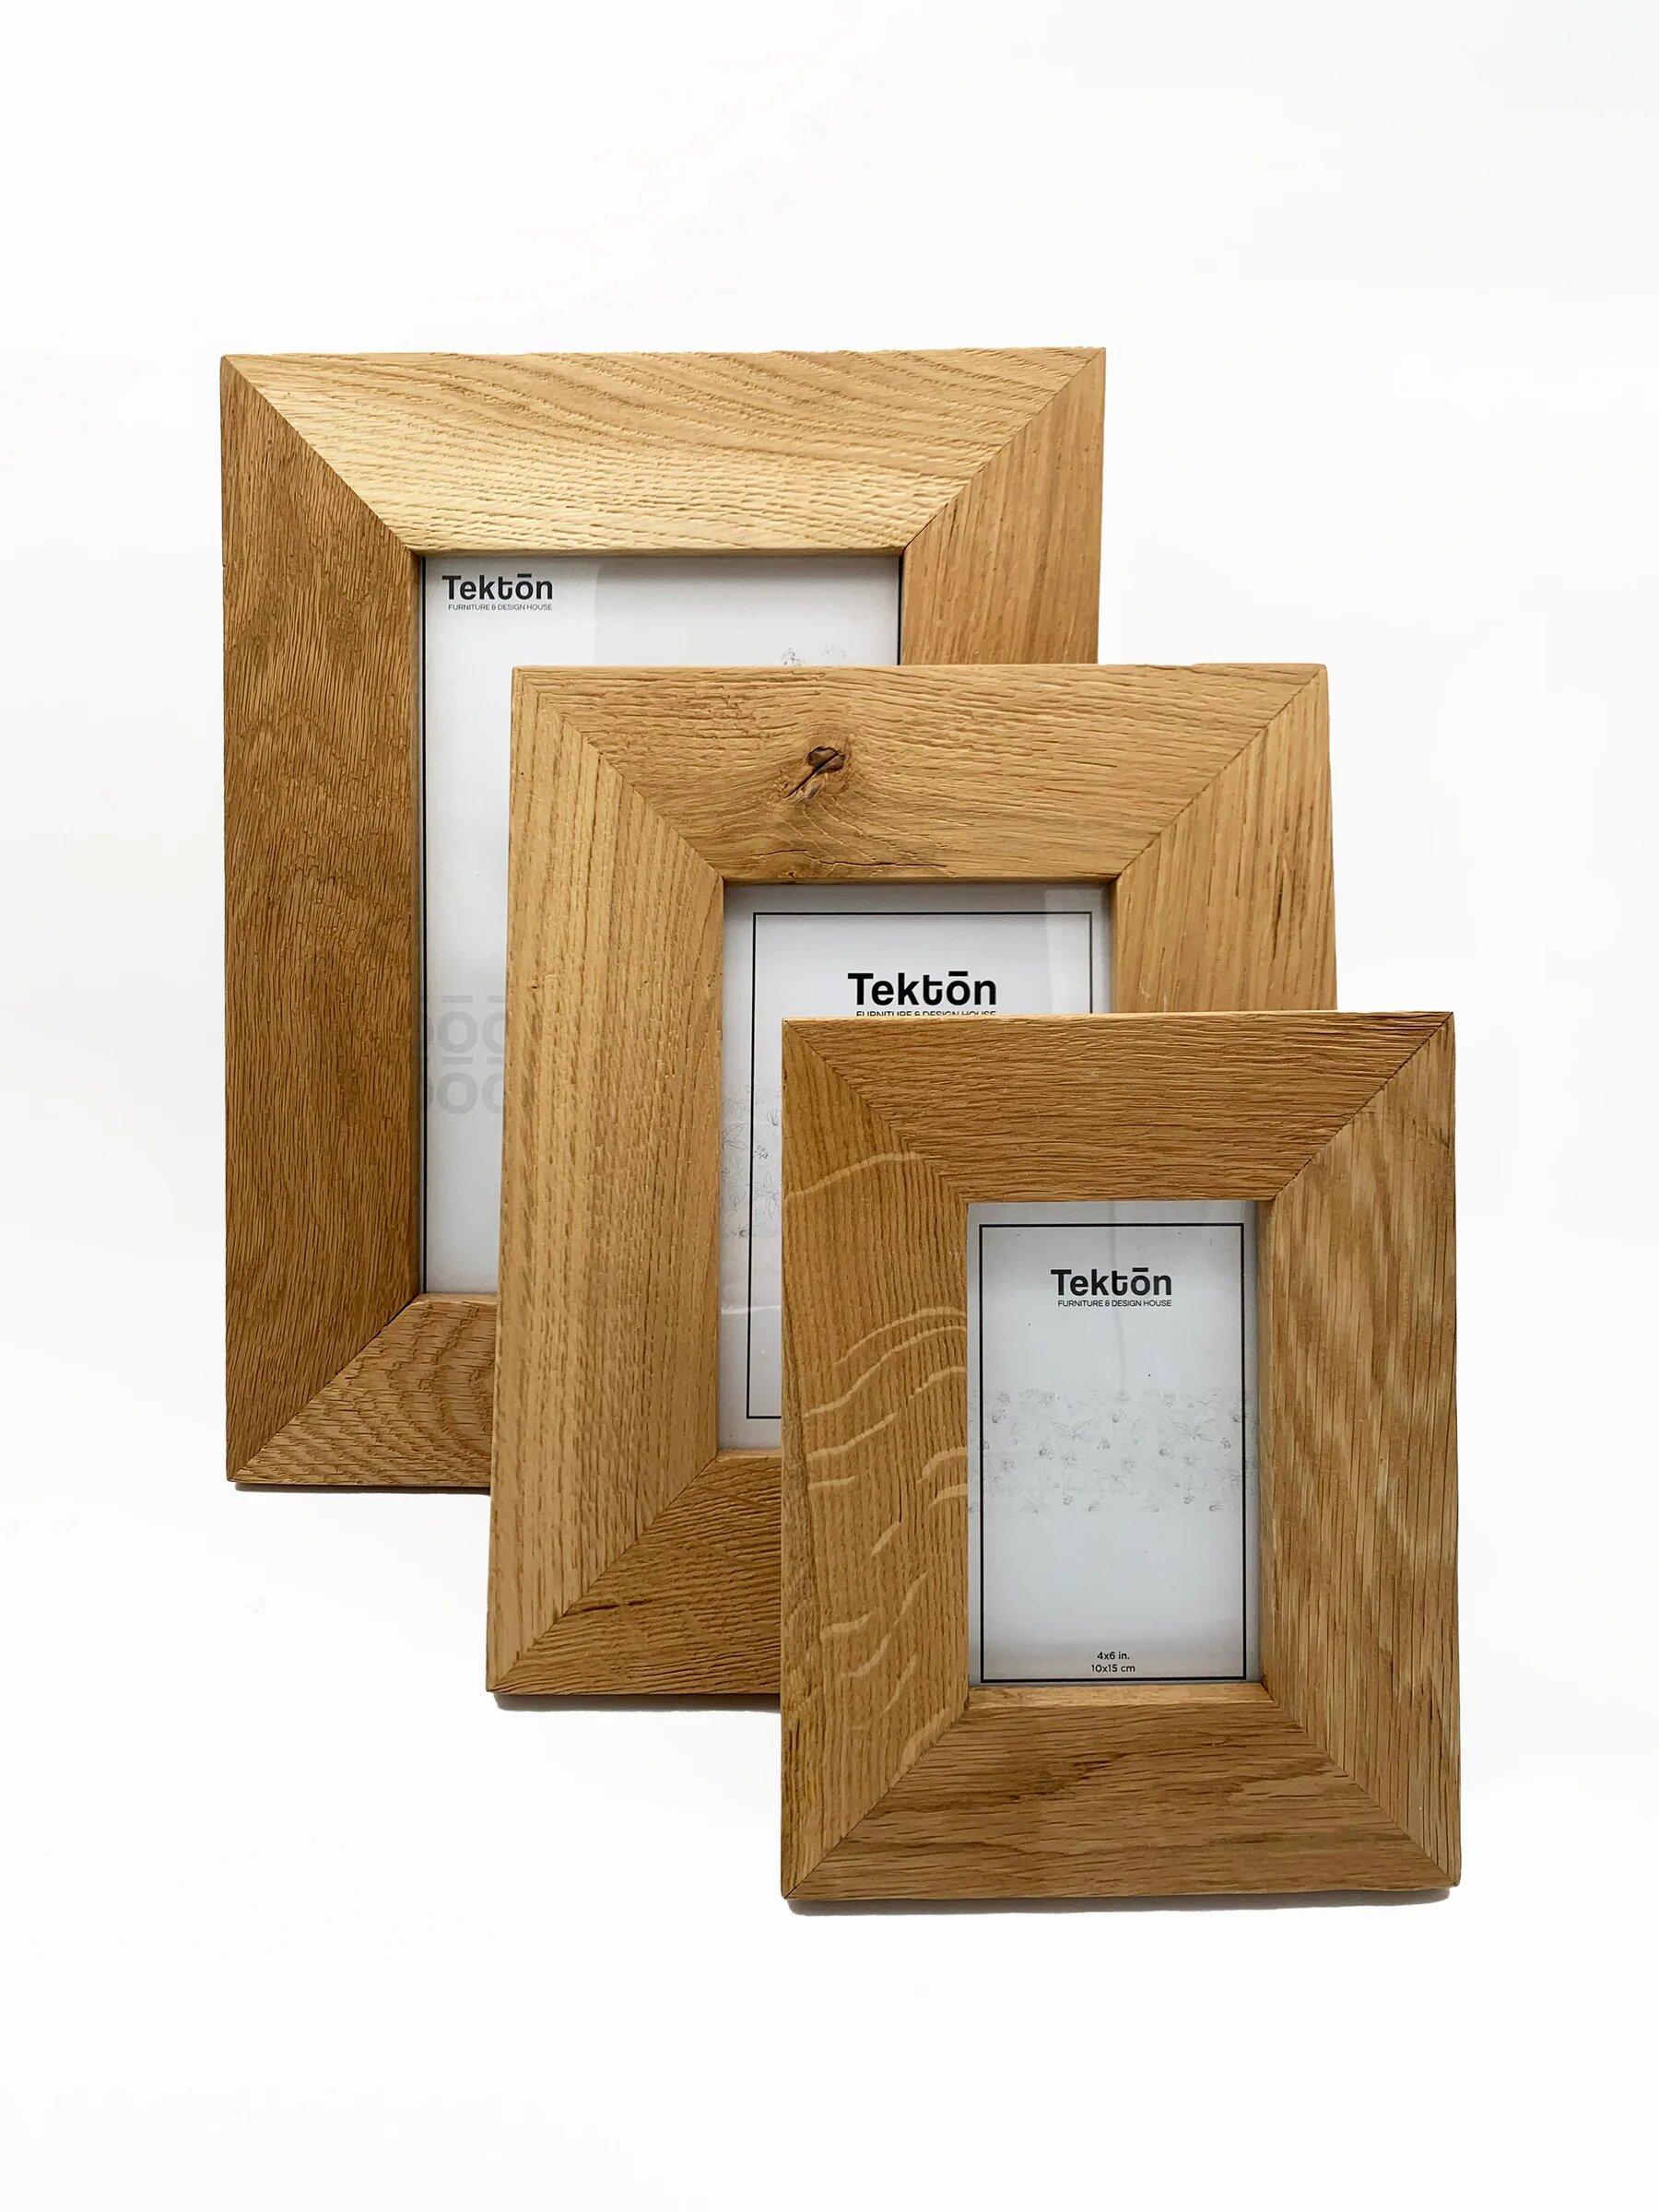 Our Oak Frames are a perfect blend of modern style and functionality. Crafted from eco-friendly oak and mahogany wood, this stunning piece is designed to stand the test of time. Enhance the look of your living space and make a statement with our Oak